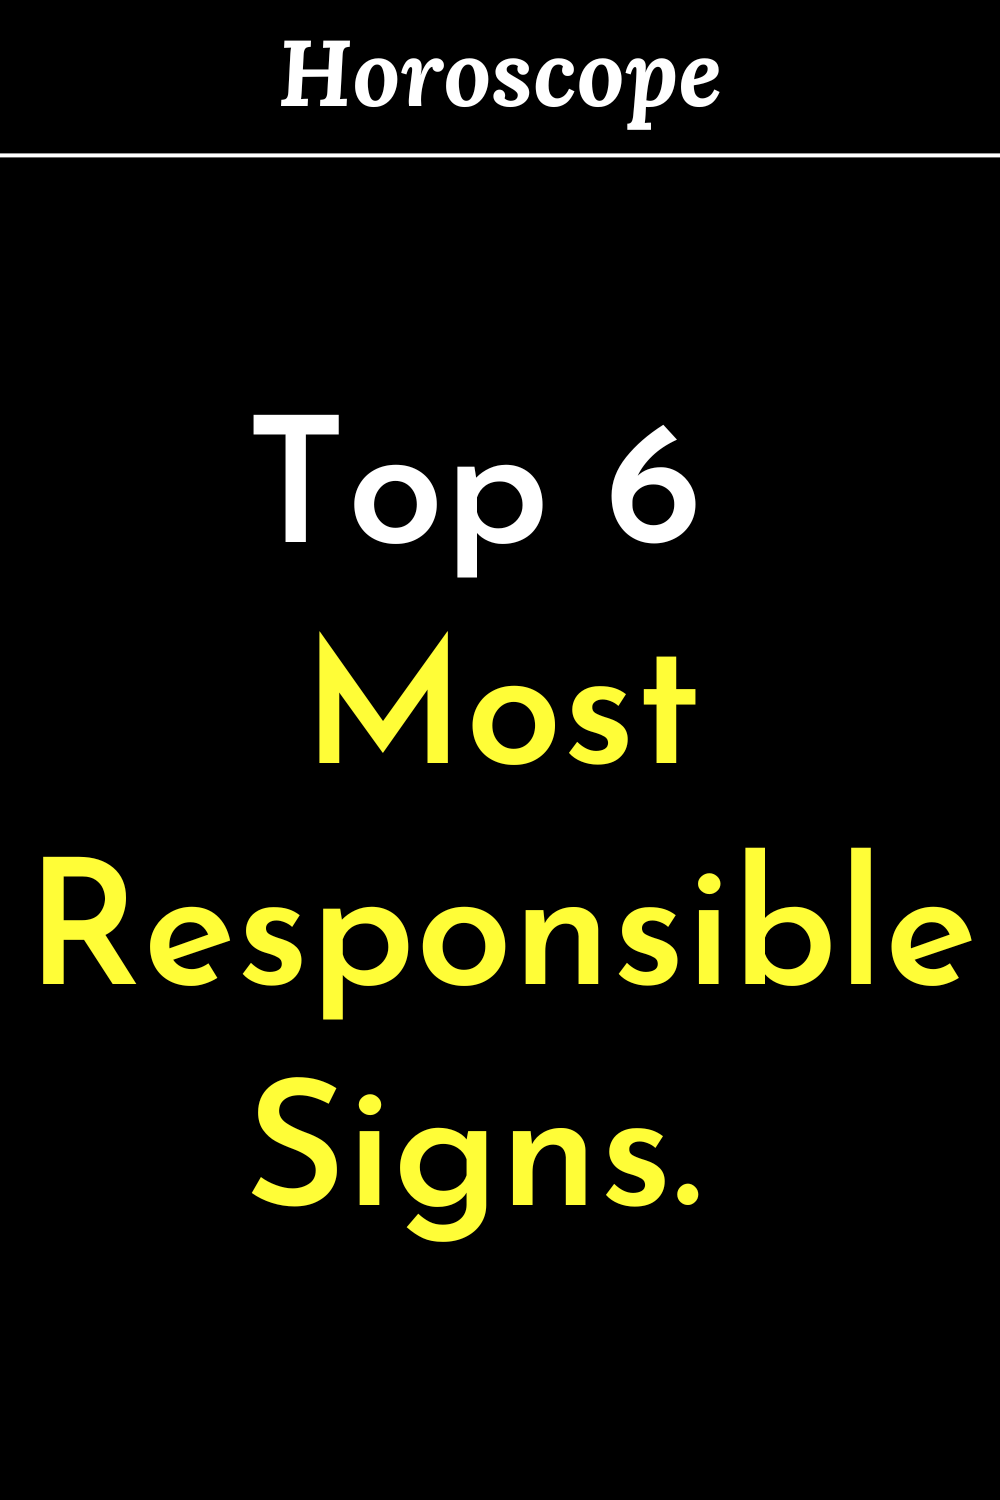 Top 6 Most Responsible Signs. Find Out Who You Can Rely On!